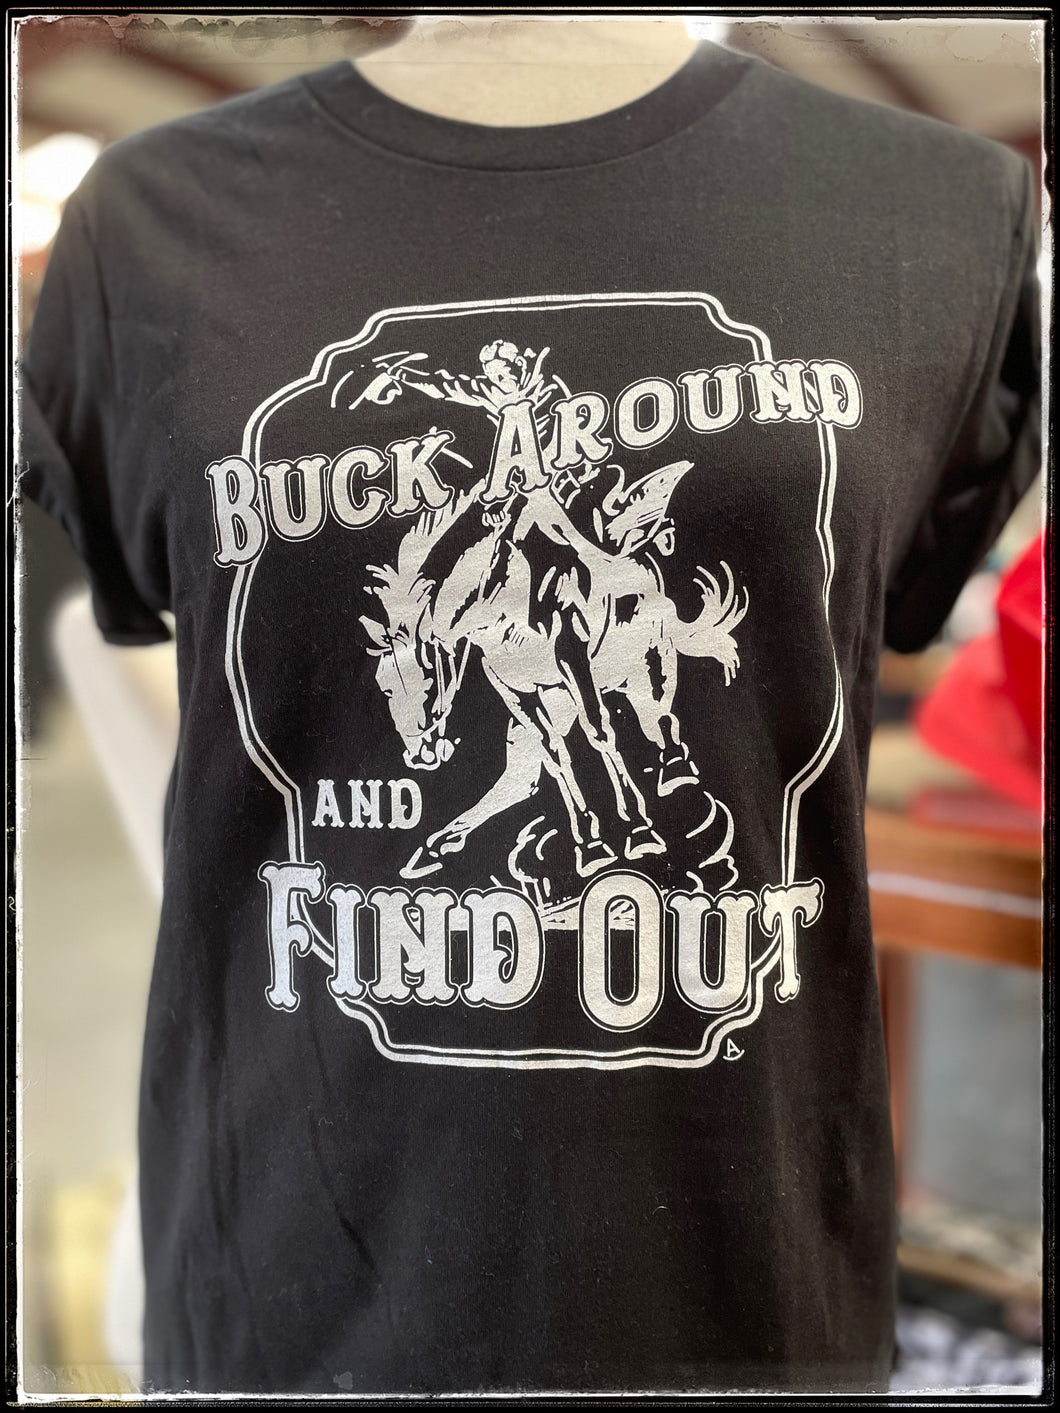 Buck Around and Find Out Tshirt